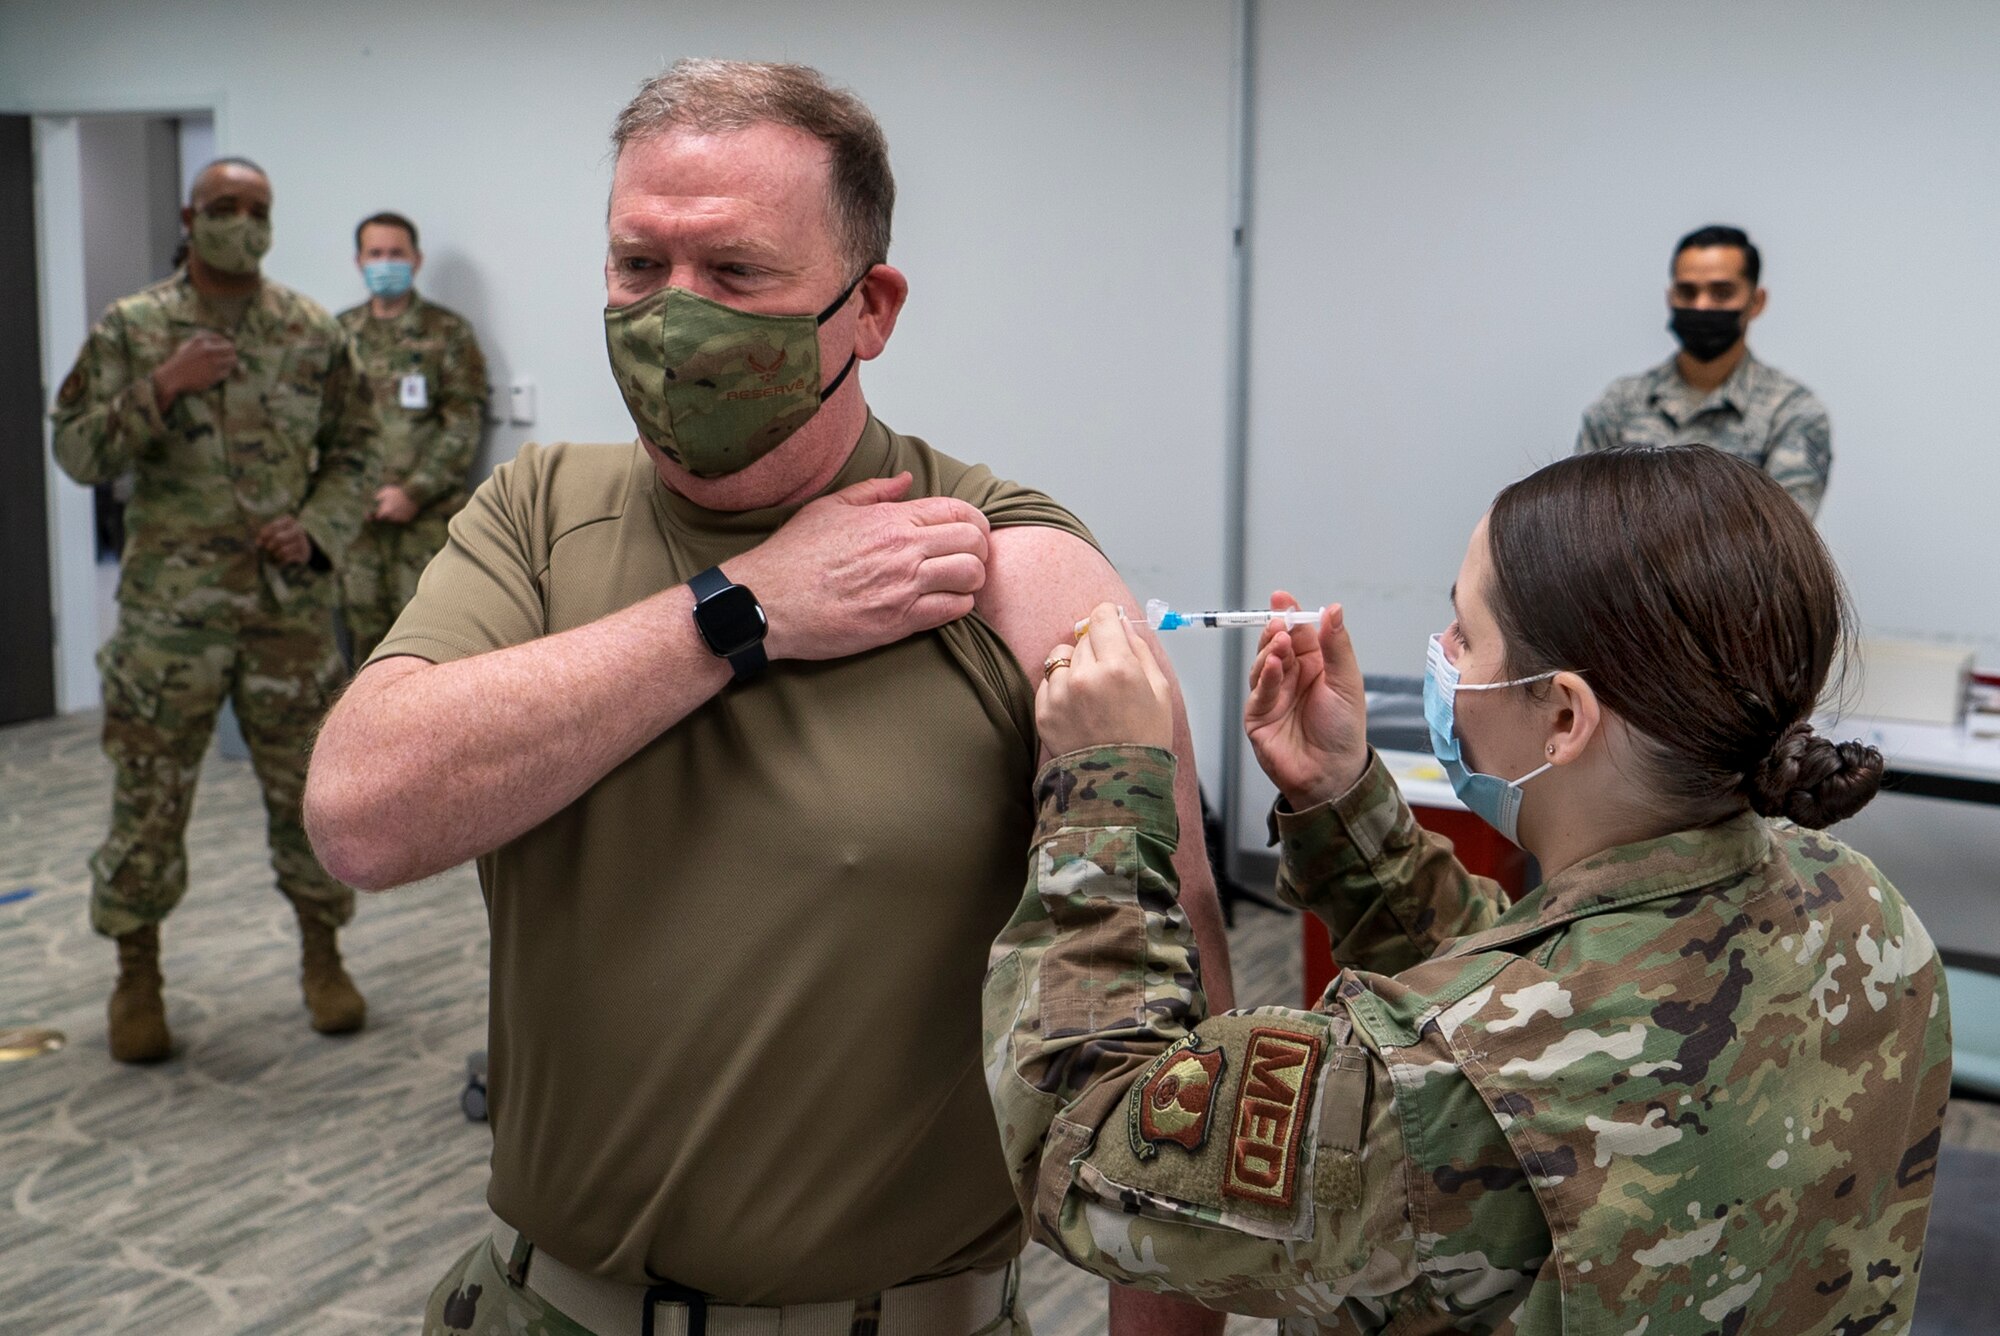 U.S. Air Force Reserve Senior Airman Megan Stahl, a medical technician with the 78th Healthcare Operations Squadron, administers the Covid-19 vaccine to Lieutenant General Richard Scobee, chief of the Air Force Reserve and commander, Air Force Reserve Command, January 8th, 2021 at Robins Air Force Base, GA. (US Air Force photo by Technical Sgt. Nicholas A. Priest)